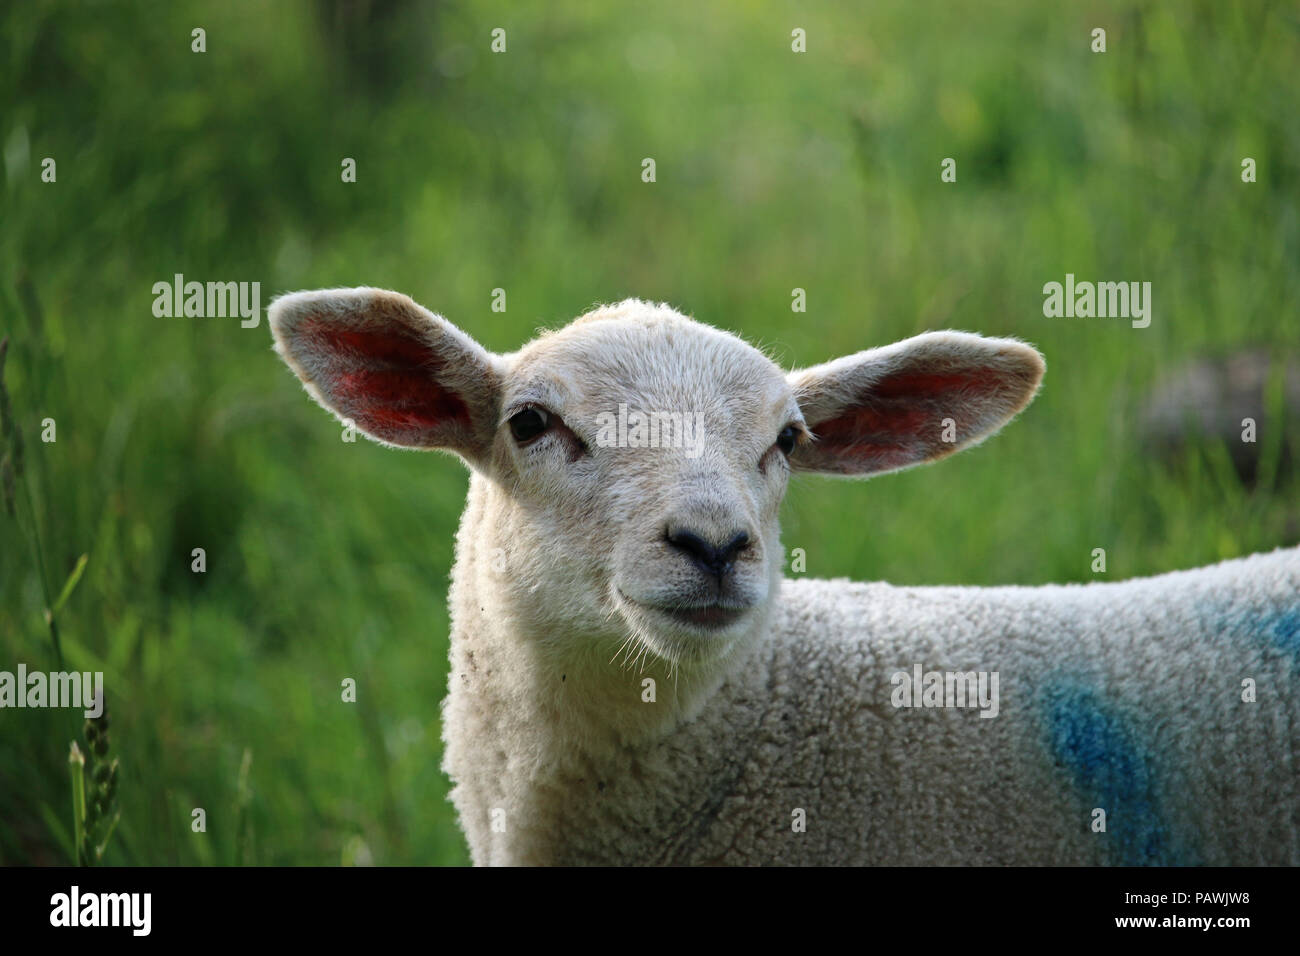 Head and shoulders of a white sheep lamb with large ears and a cute face in a field in springtime with the grass field as background. Stock Photo